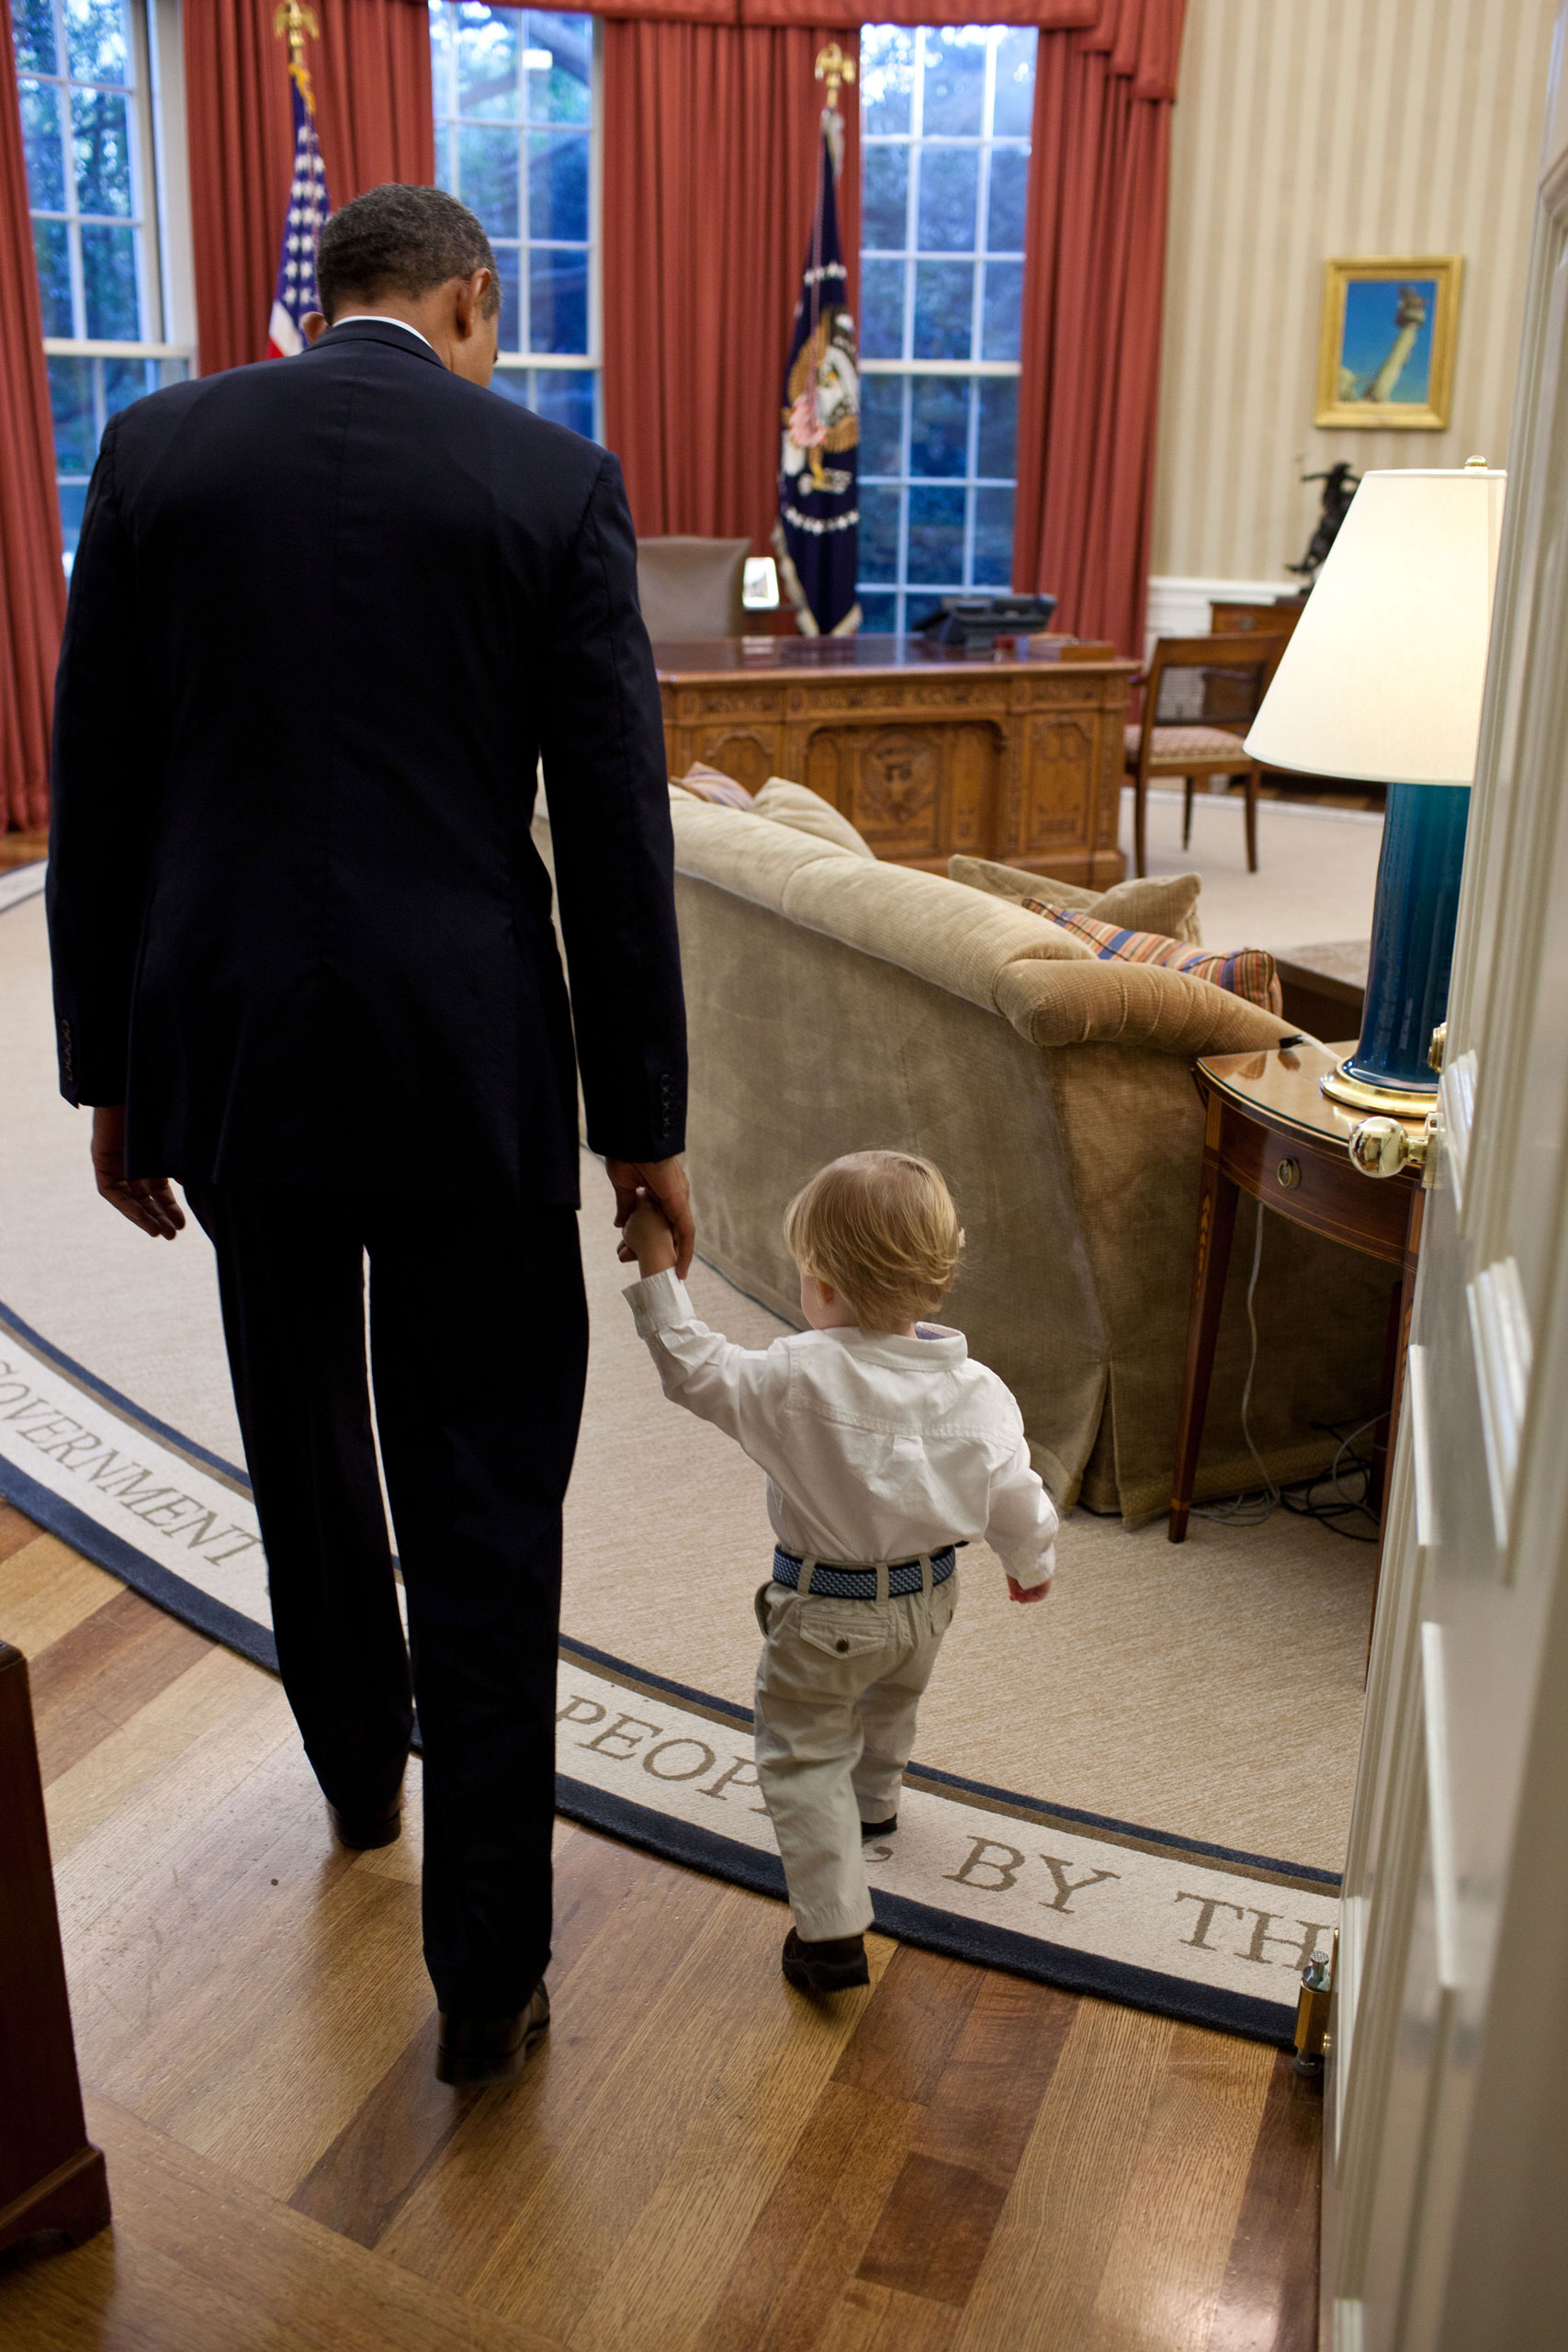 “When a White House staff member leaves their job, the President usually invites the staff member and his family to the Oval Office for a family photo to thank them for their service. Here the President walks with William Jones, son of departing aide Luke Jones, before a family photo,” Sept. 29, 2011.